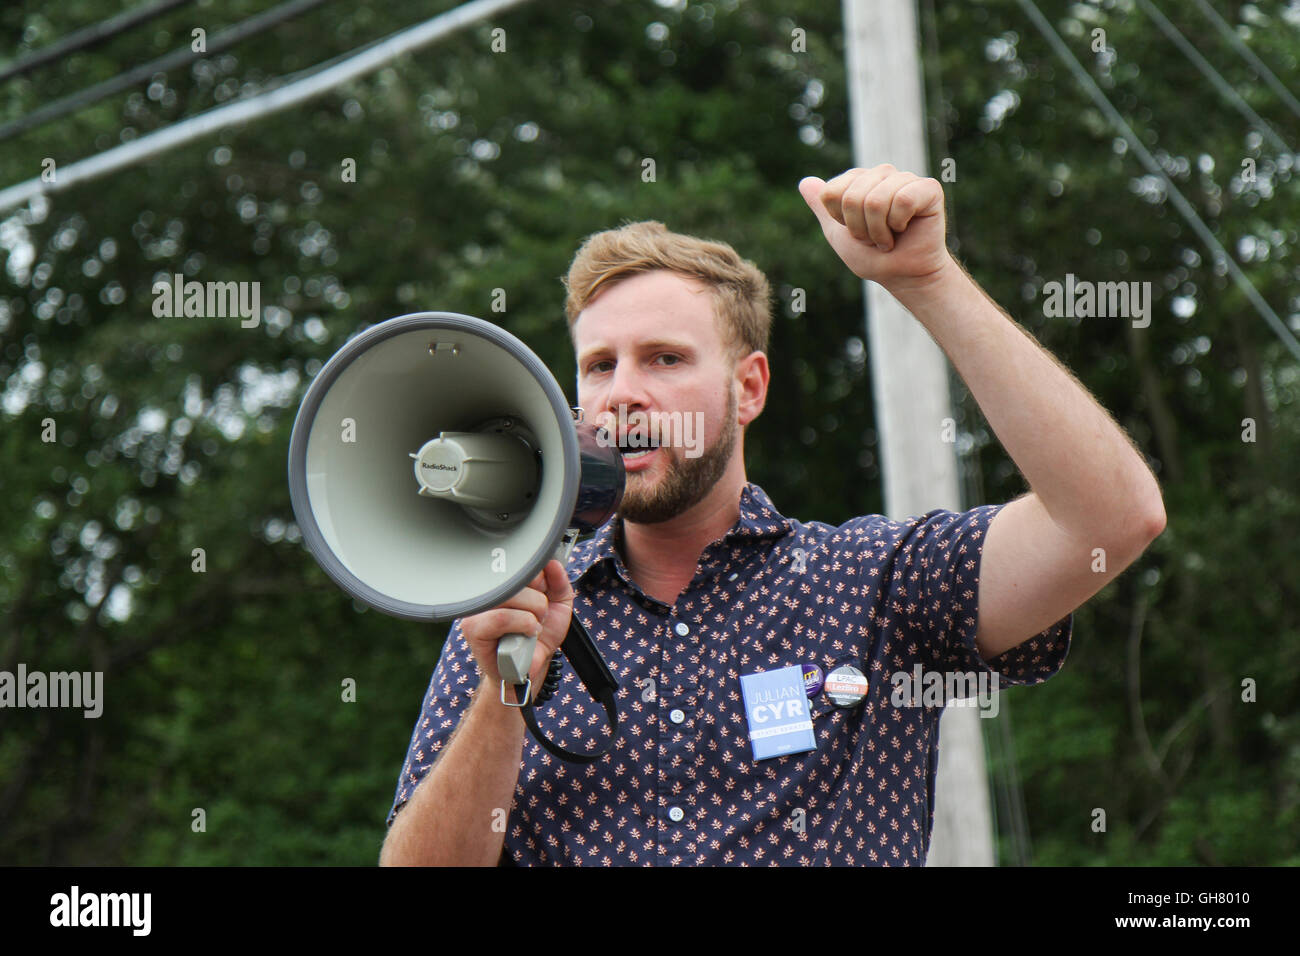 Osterville, Massachusetts, USA. 6th August, 2016. A man speaks during a protest opposing Republican presidential nominee Donald Trump, near a fundraiser businessman William Koch is hosting for Trump. Credit:  Susan Pease/Alamy Live News Stock Photo